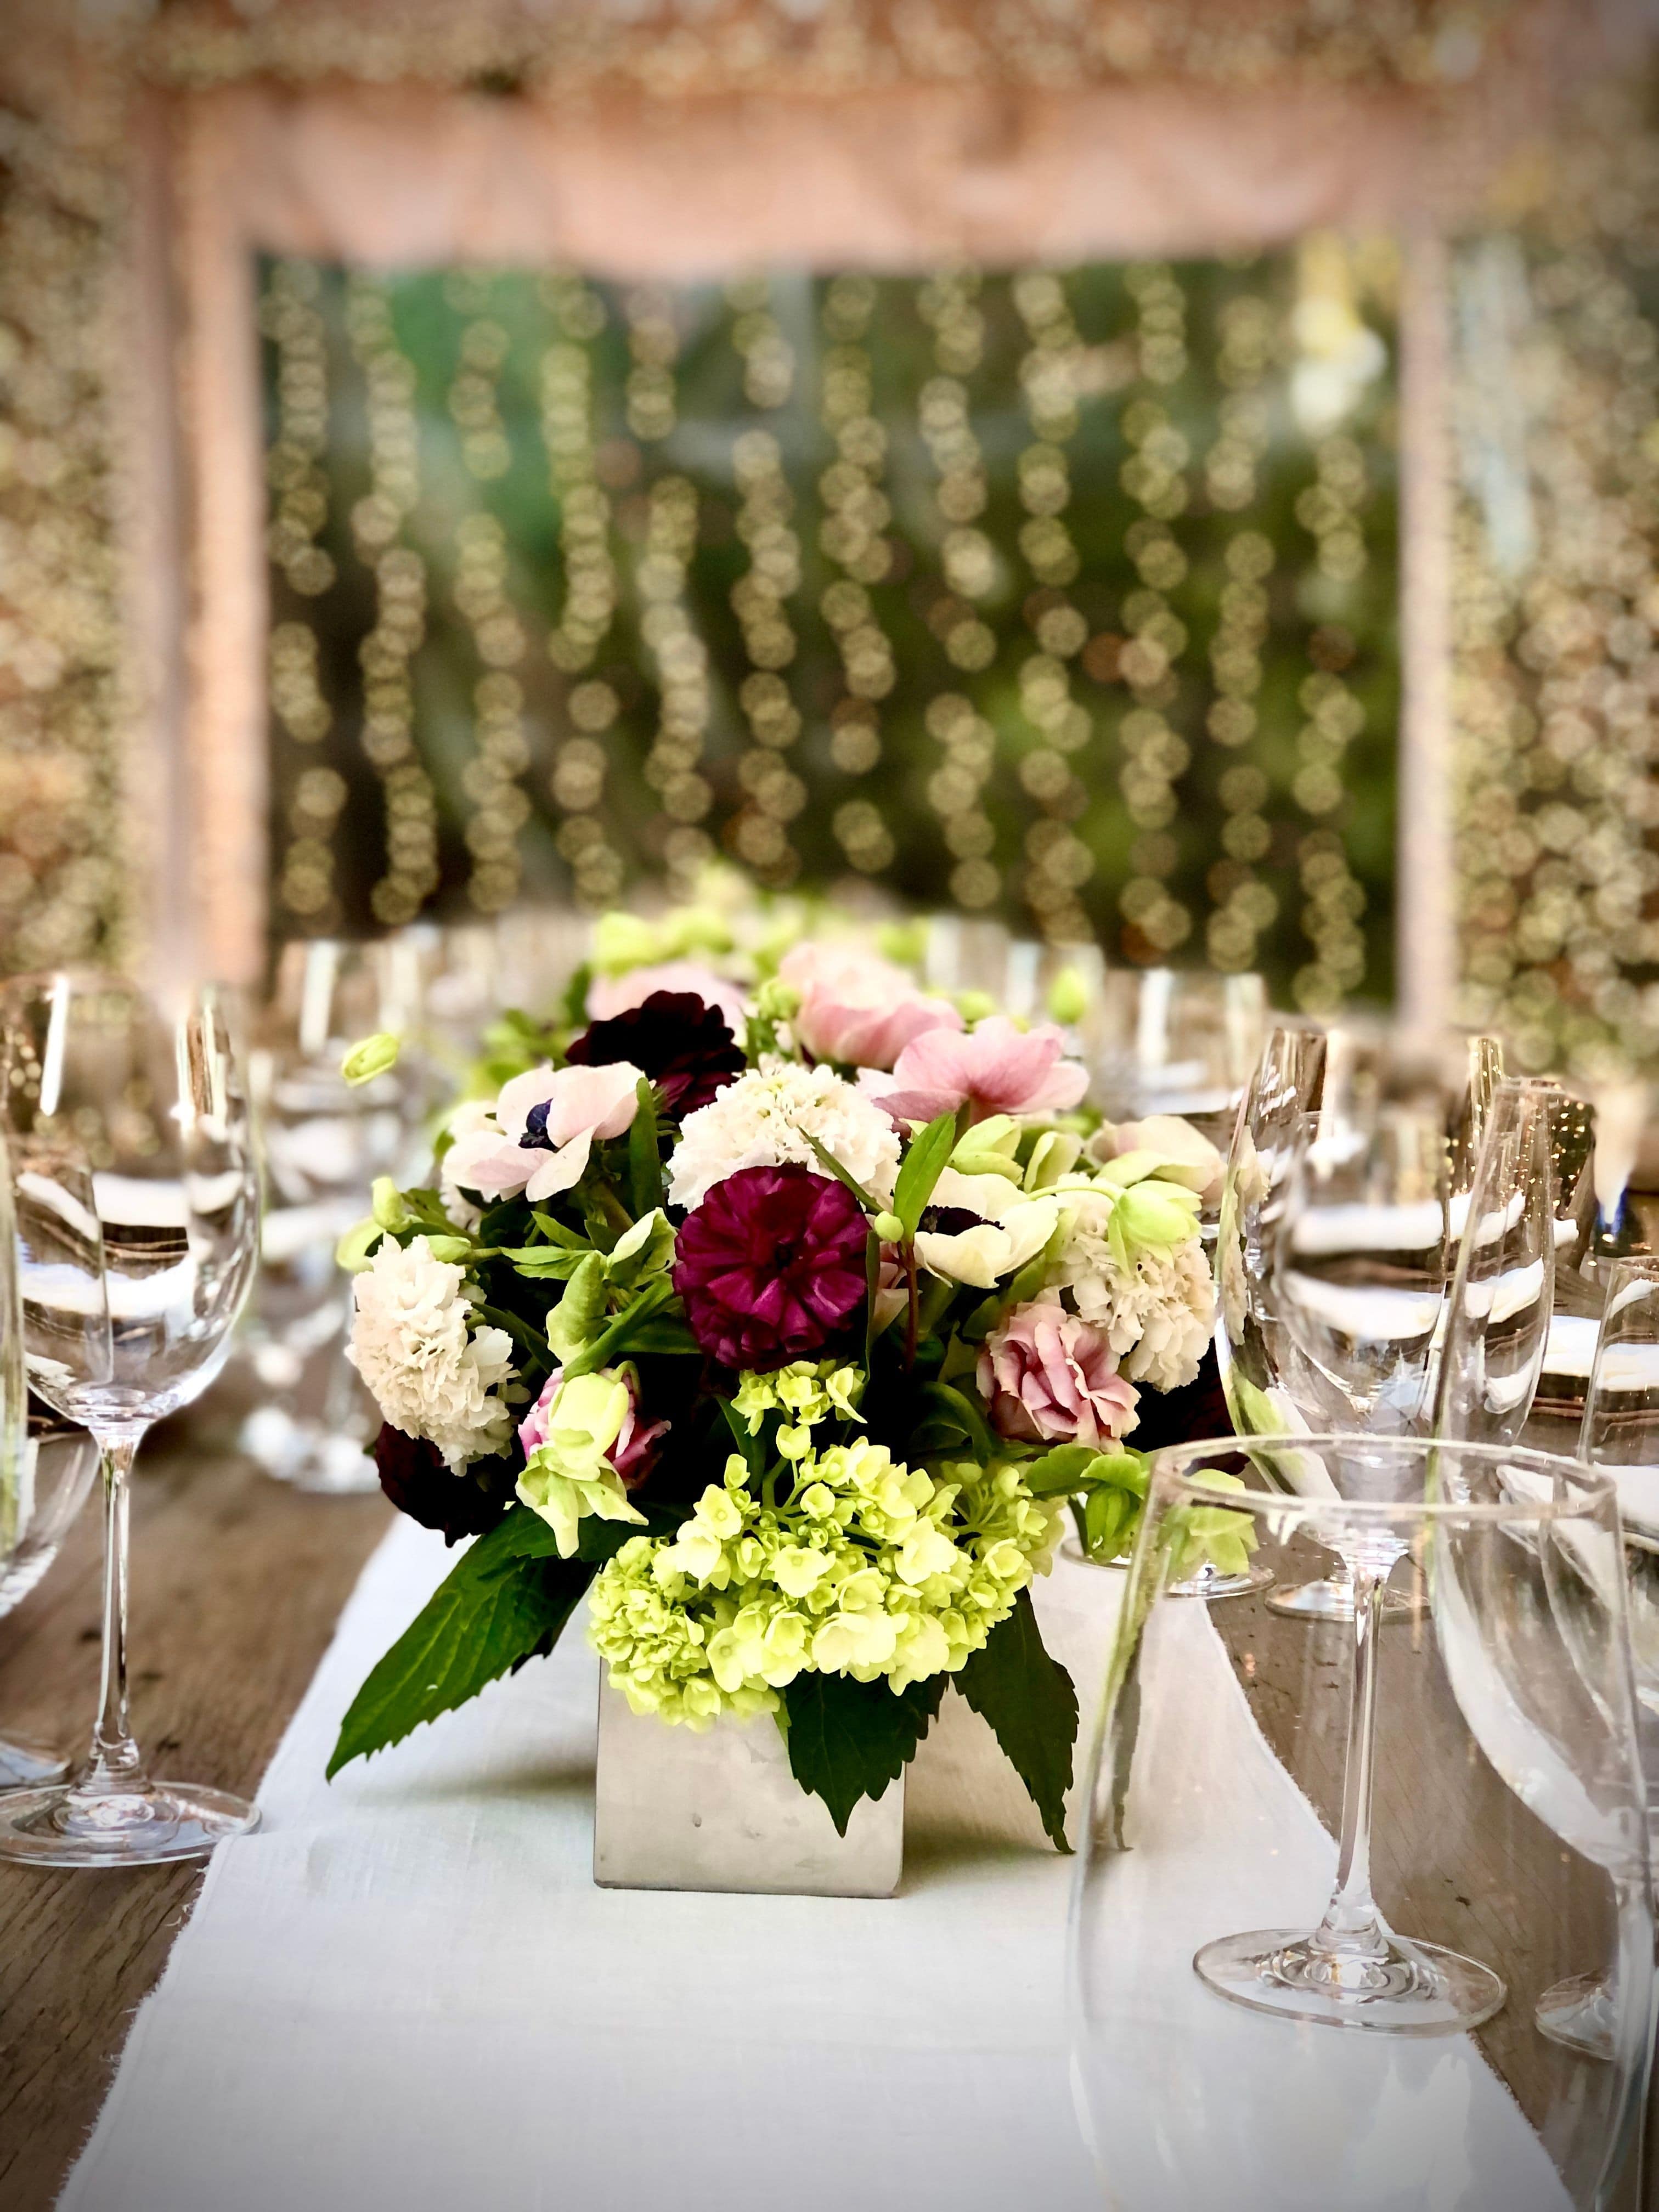 Flowers and Glassware